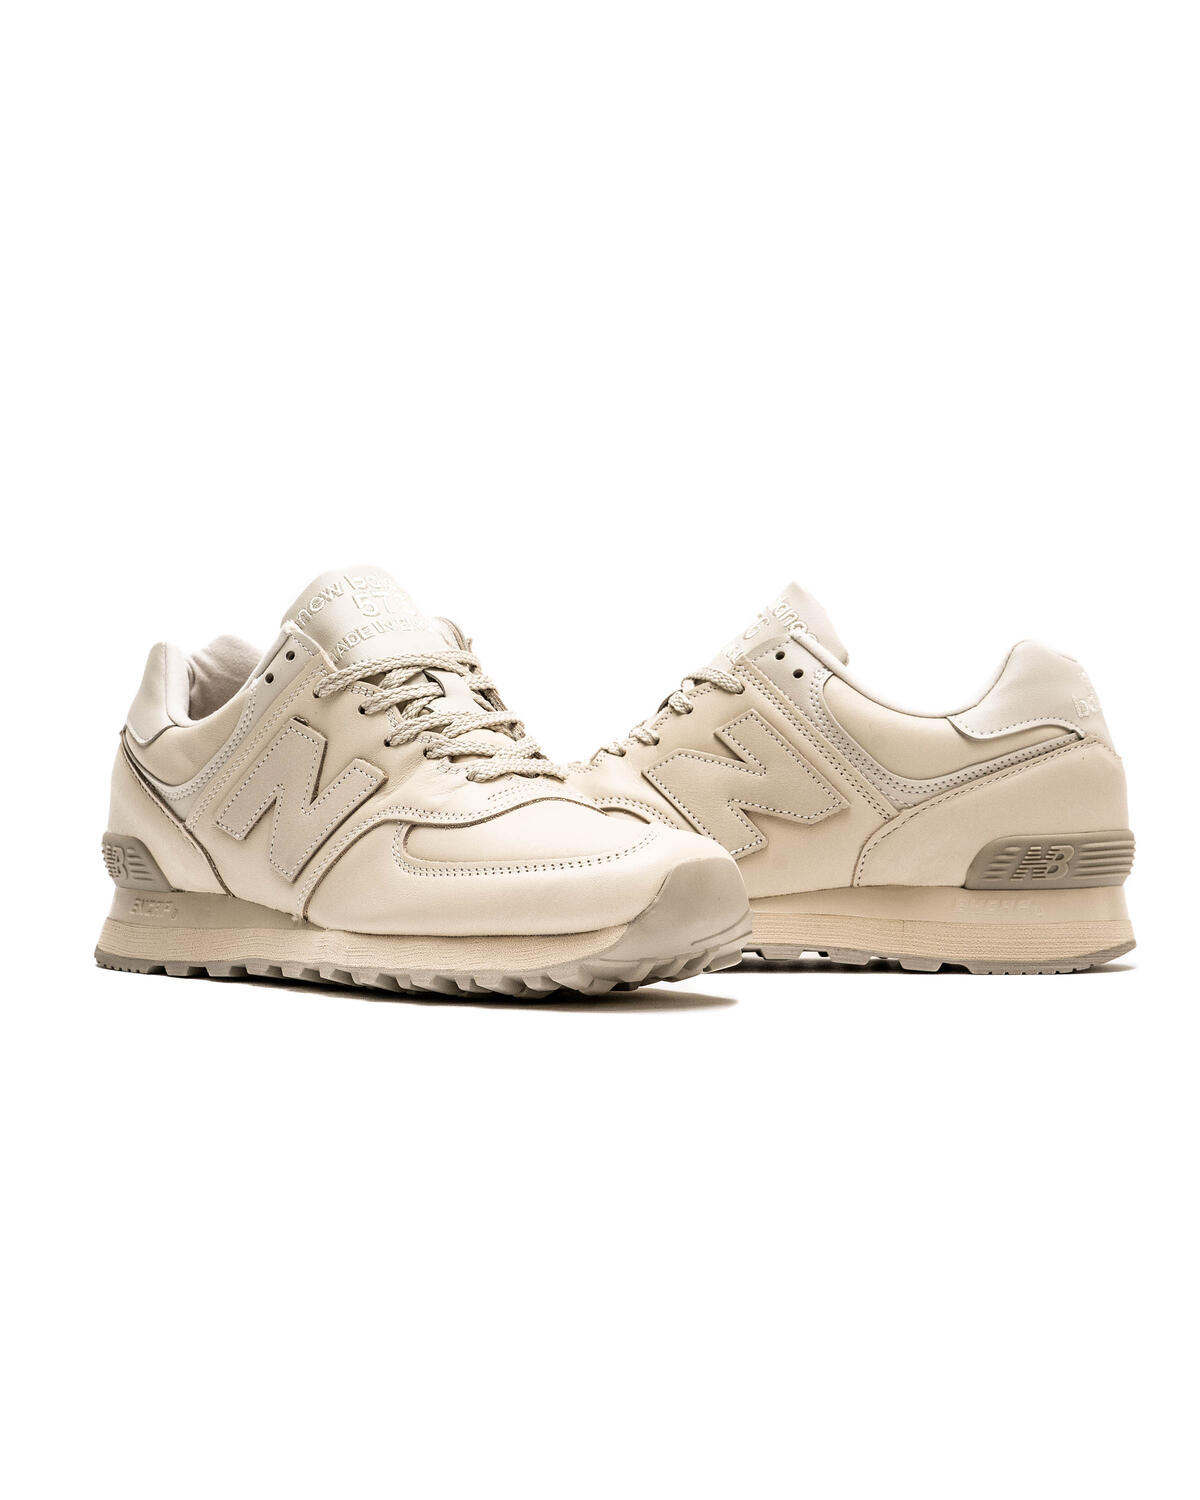 New Balance OU 576 OW - Made in UK